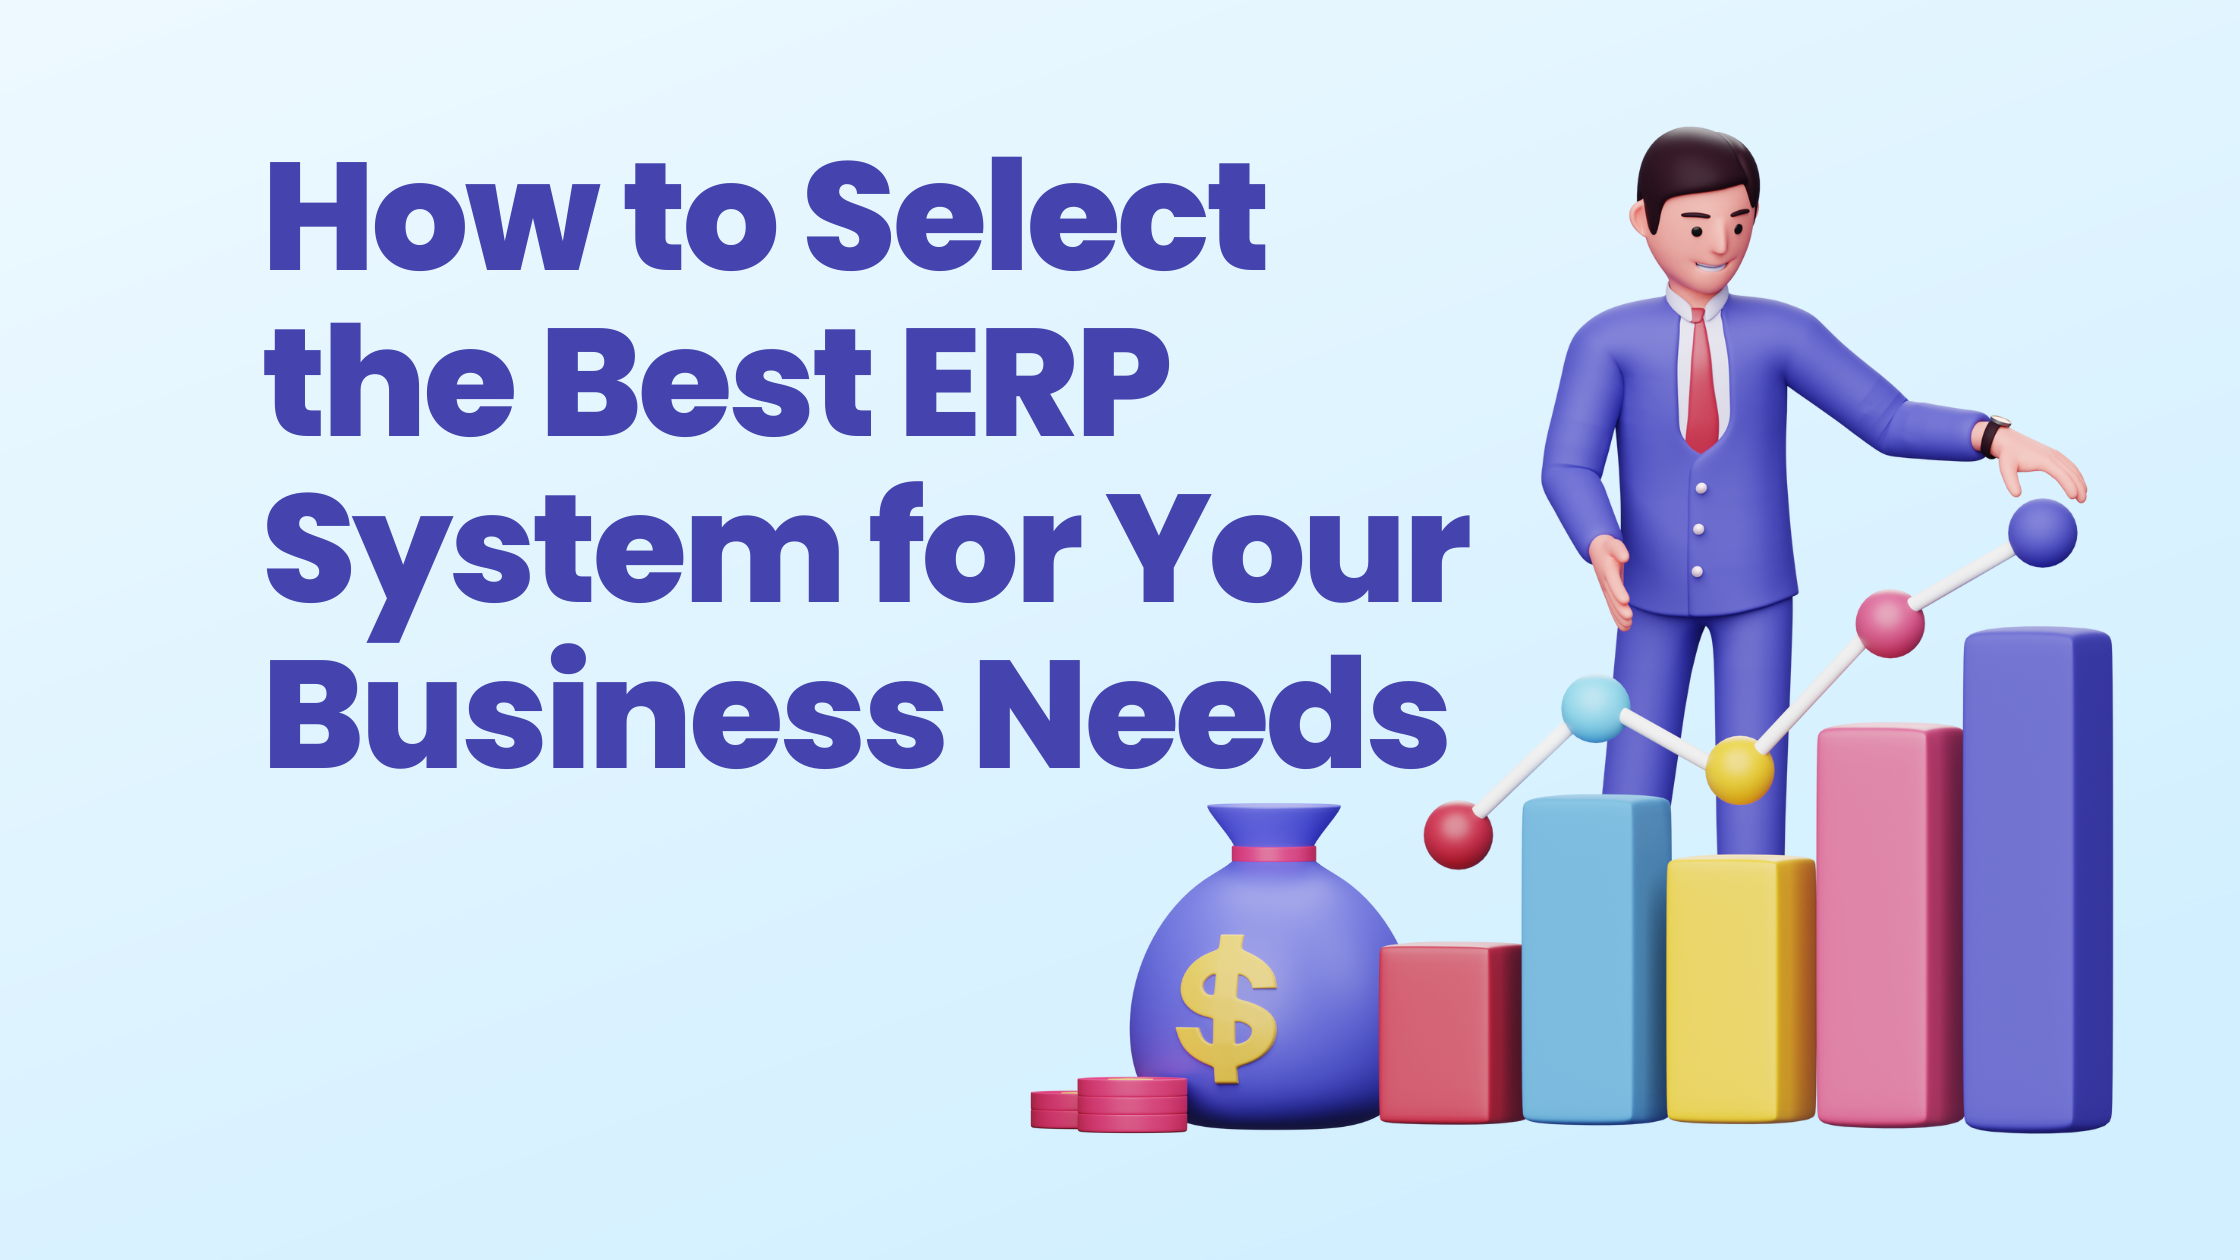 How to Select the Best ERP System for Your Business Needs